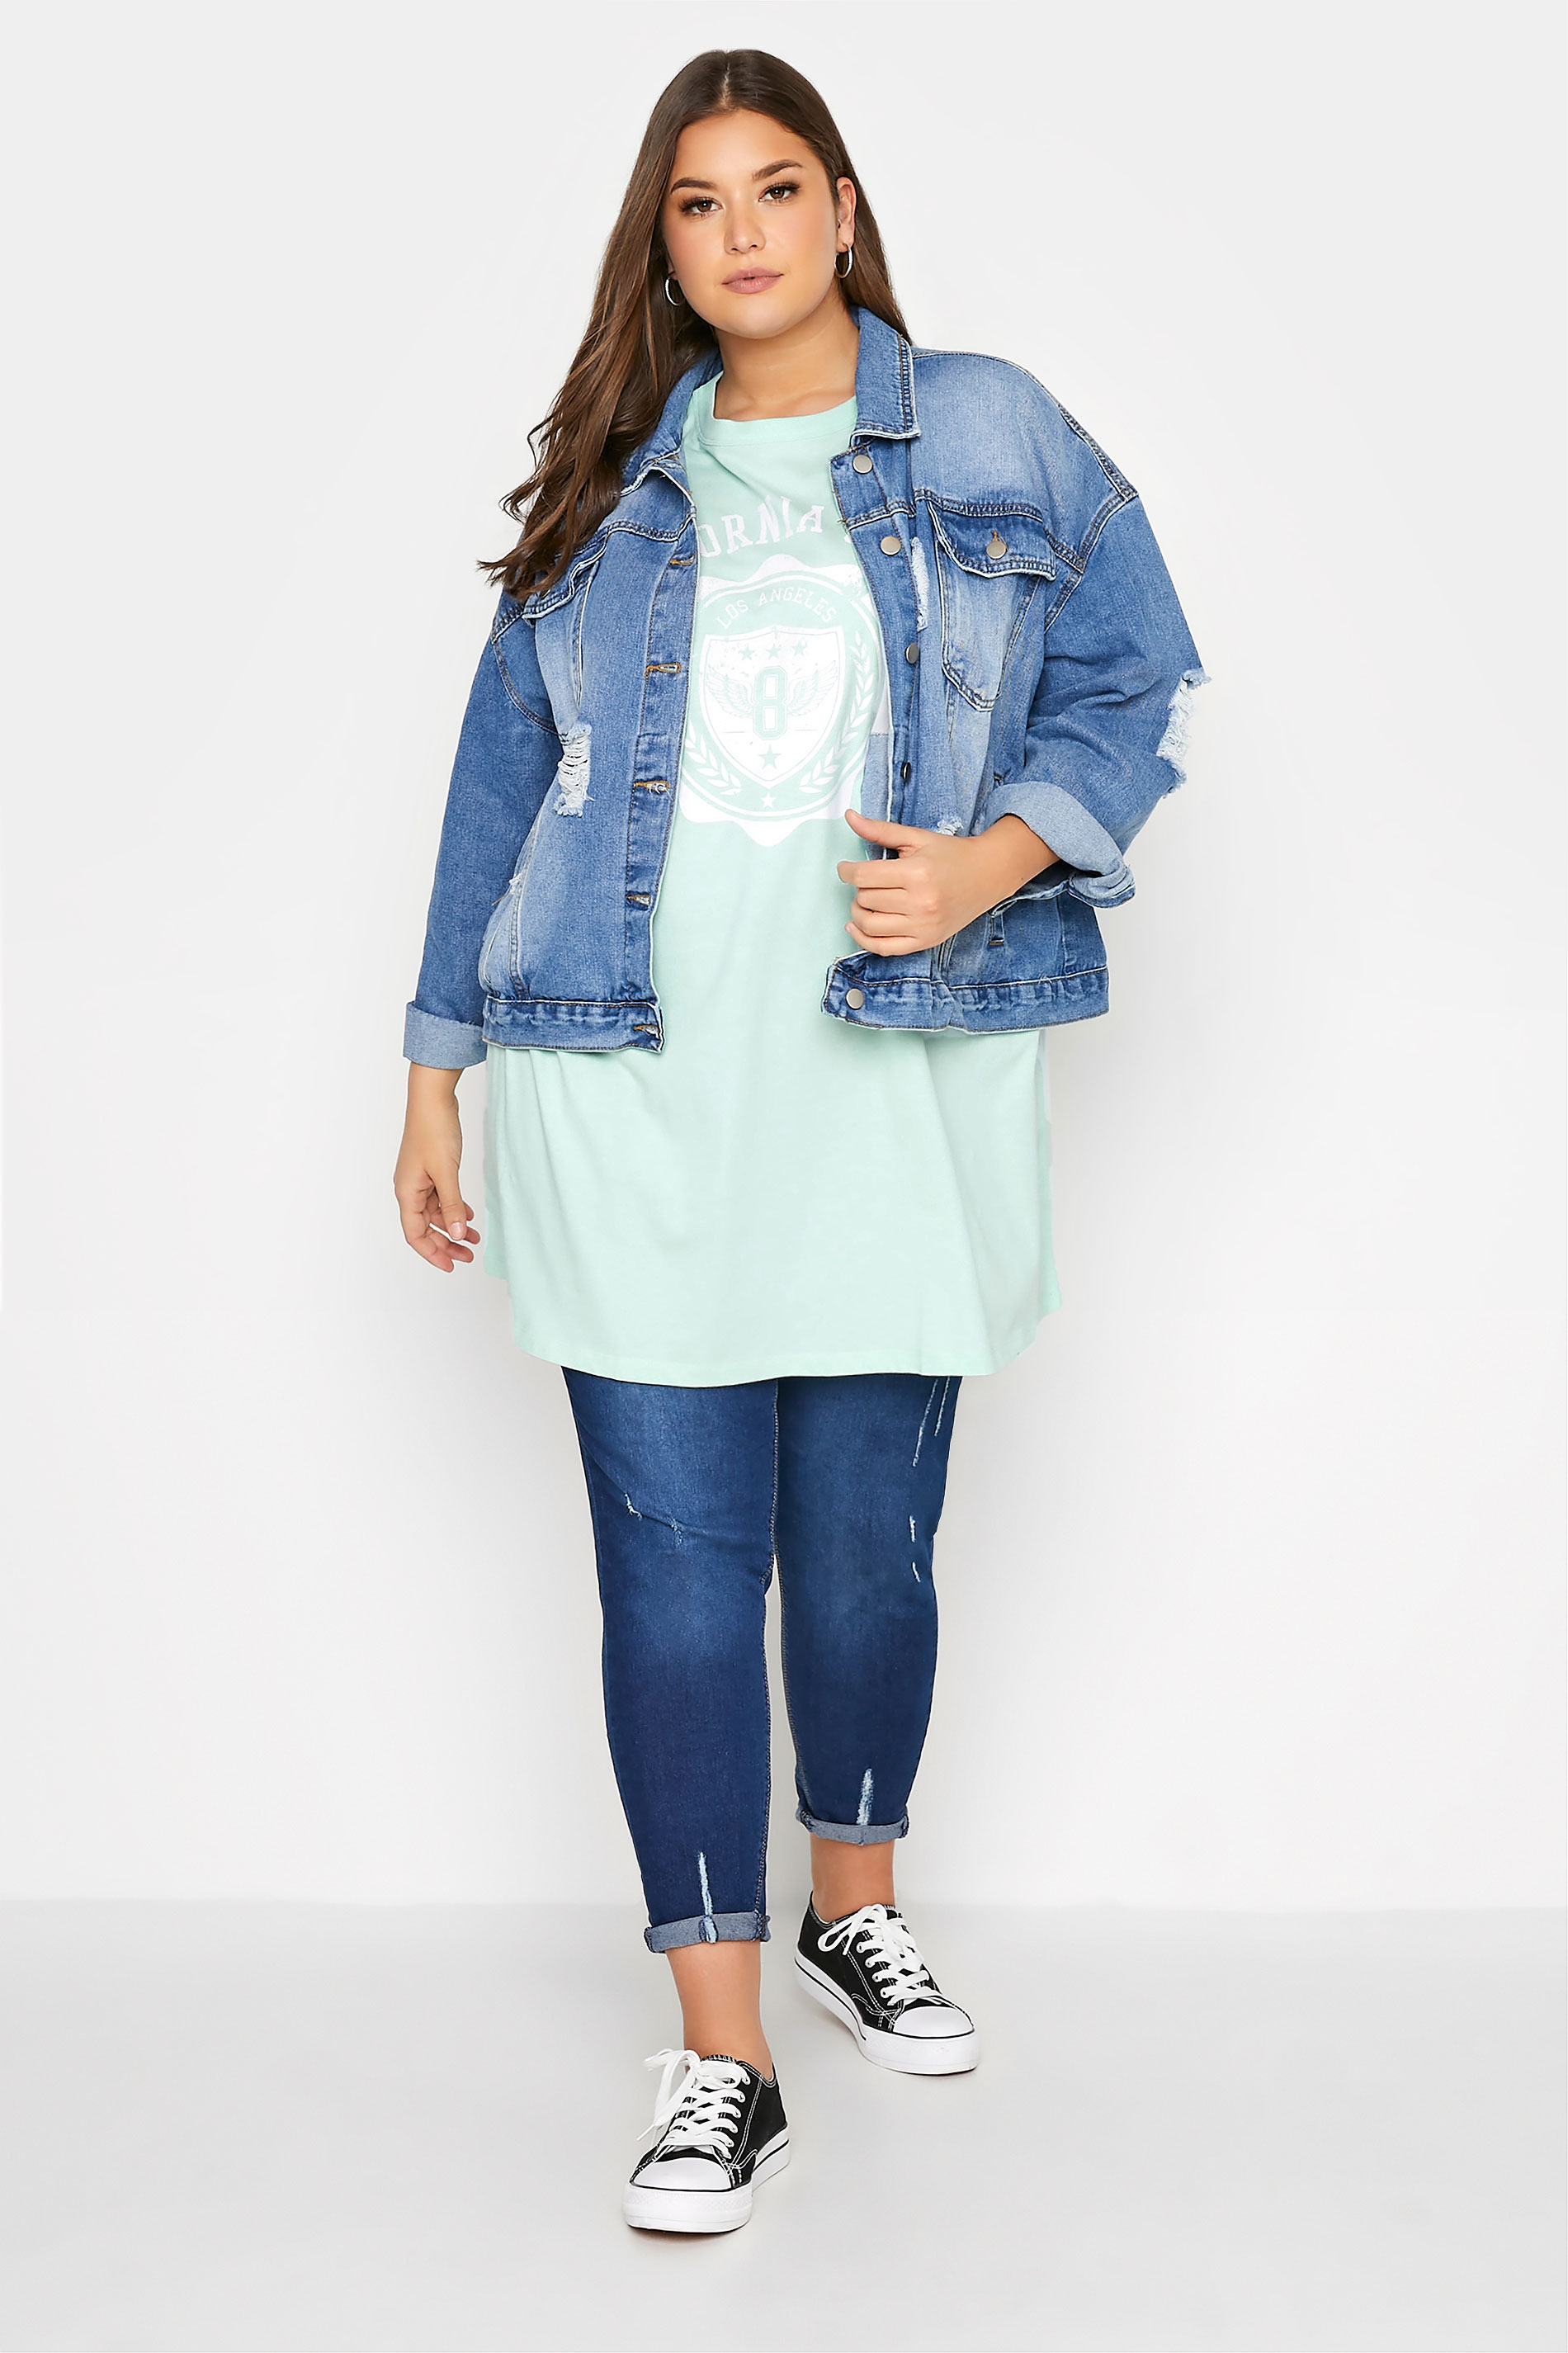 Grande taille  Tops Grande taille  T-Shirts | Tunique Verte Menthe 'California State' Manches Courtes - TW02229